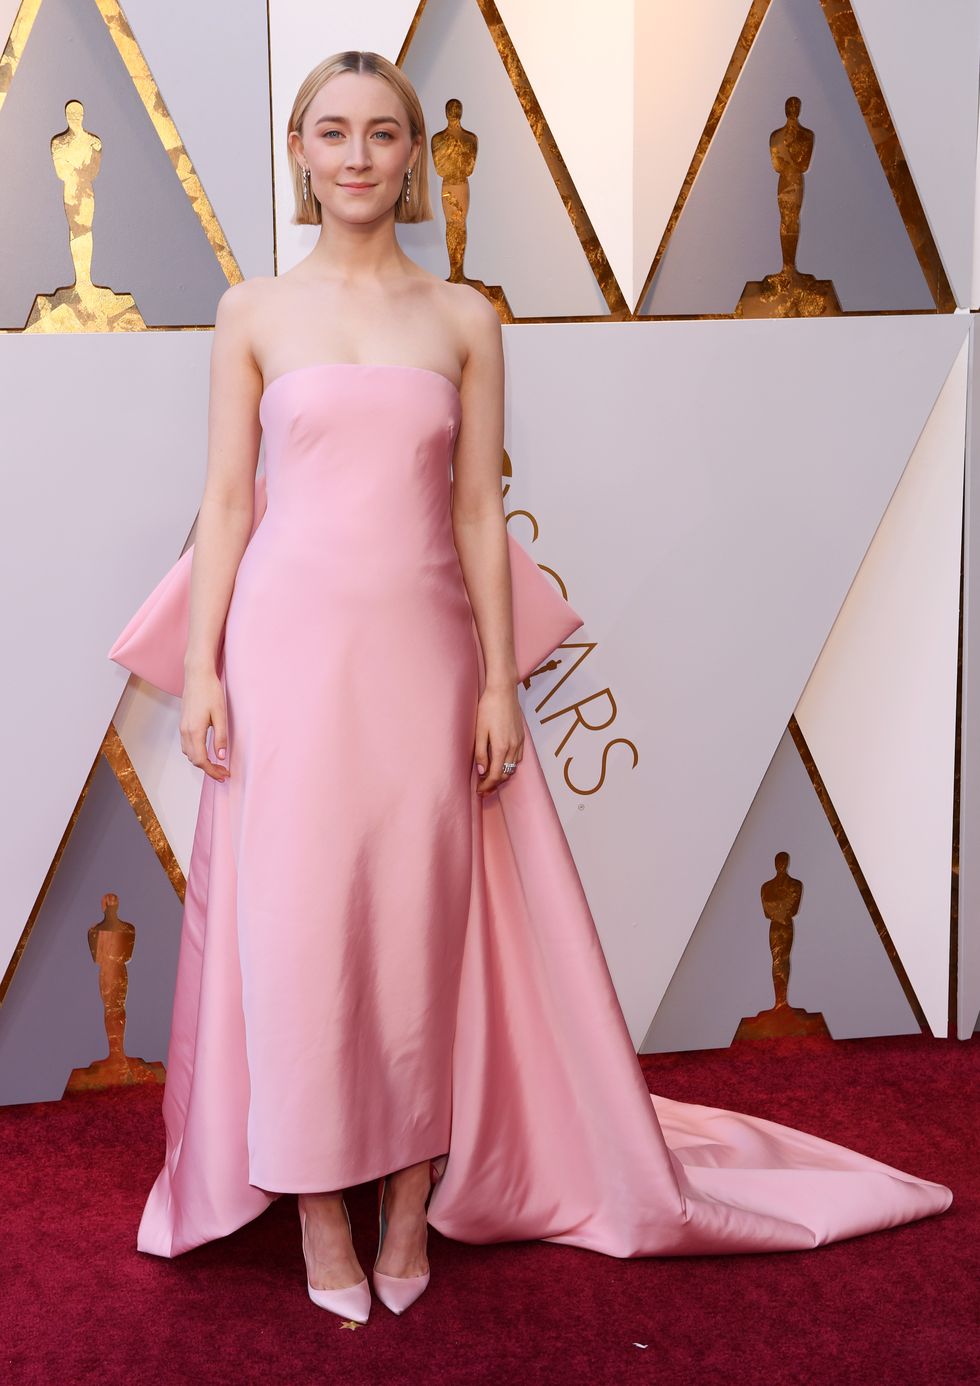 Mandatory Credit: Photo by David Fisher/REX/Shutterstock (9446173gj)Saoirse Ronan90th Annual Academy Awards, Arrivals, Los Angeles, USA - 04 Mar 2018